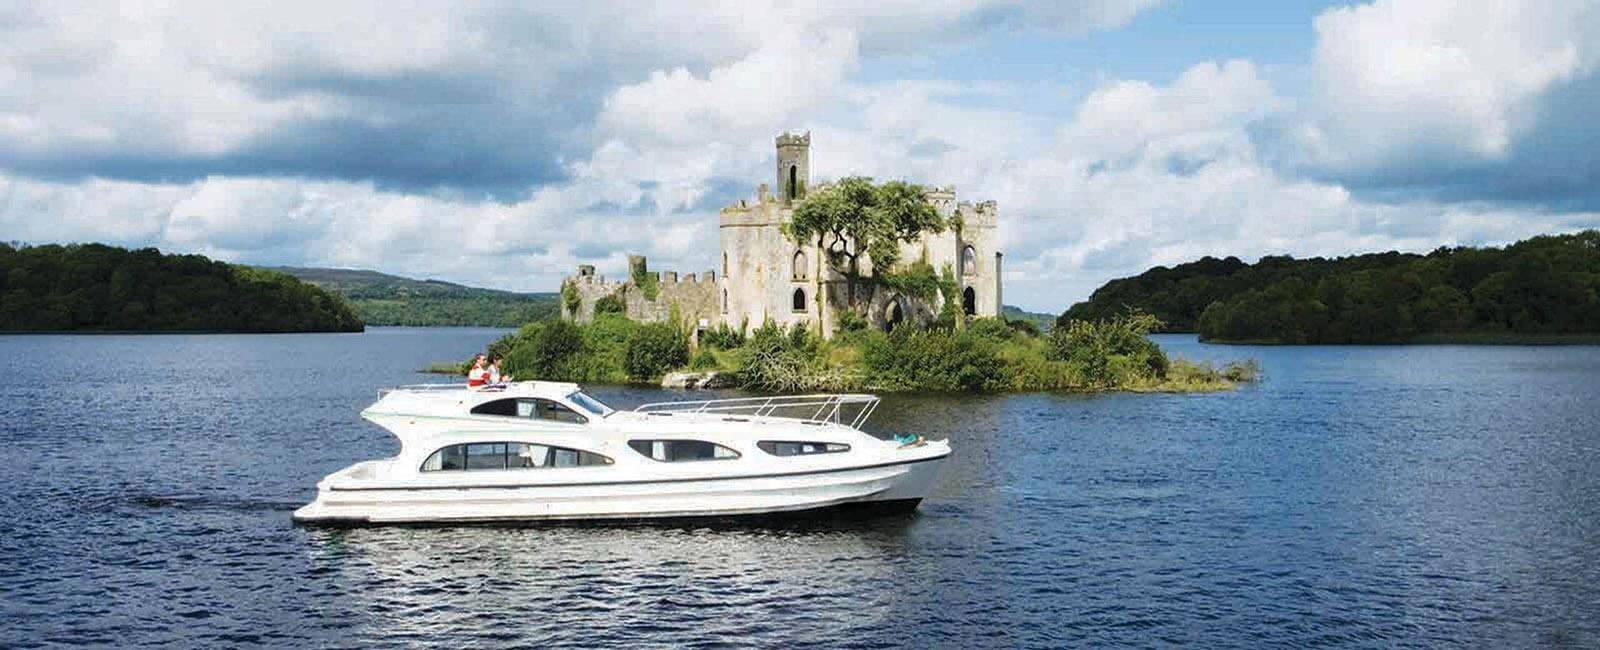 travel to ireland by boat